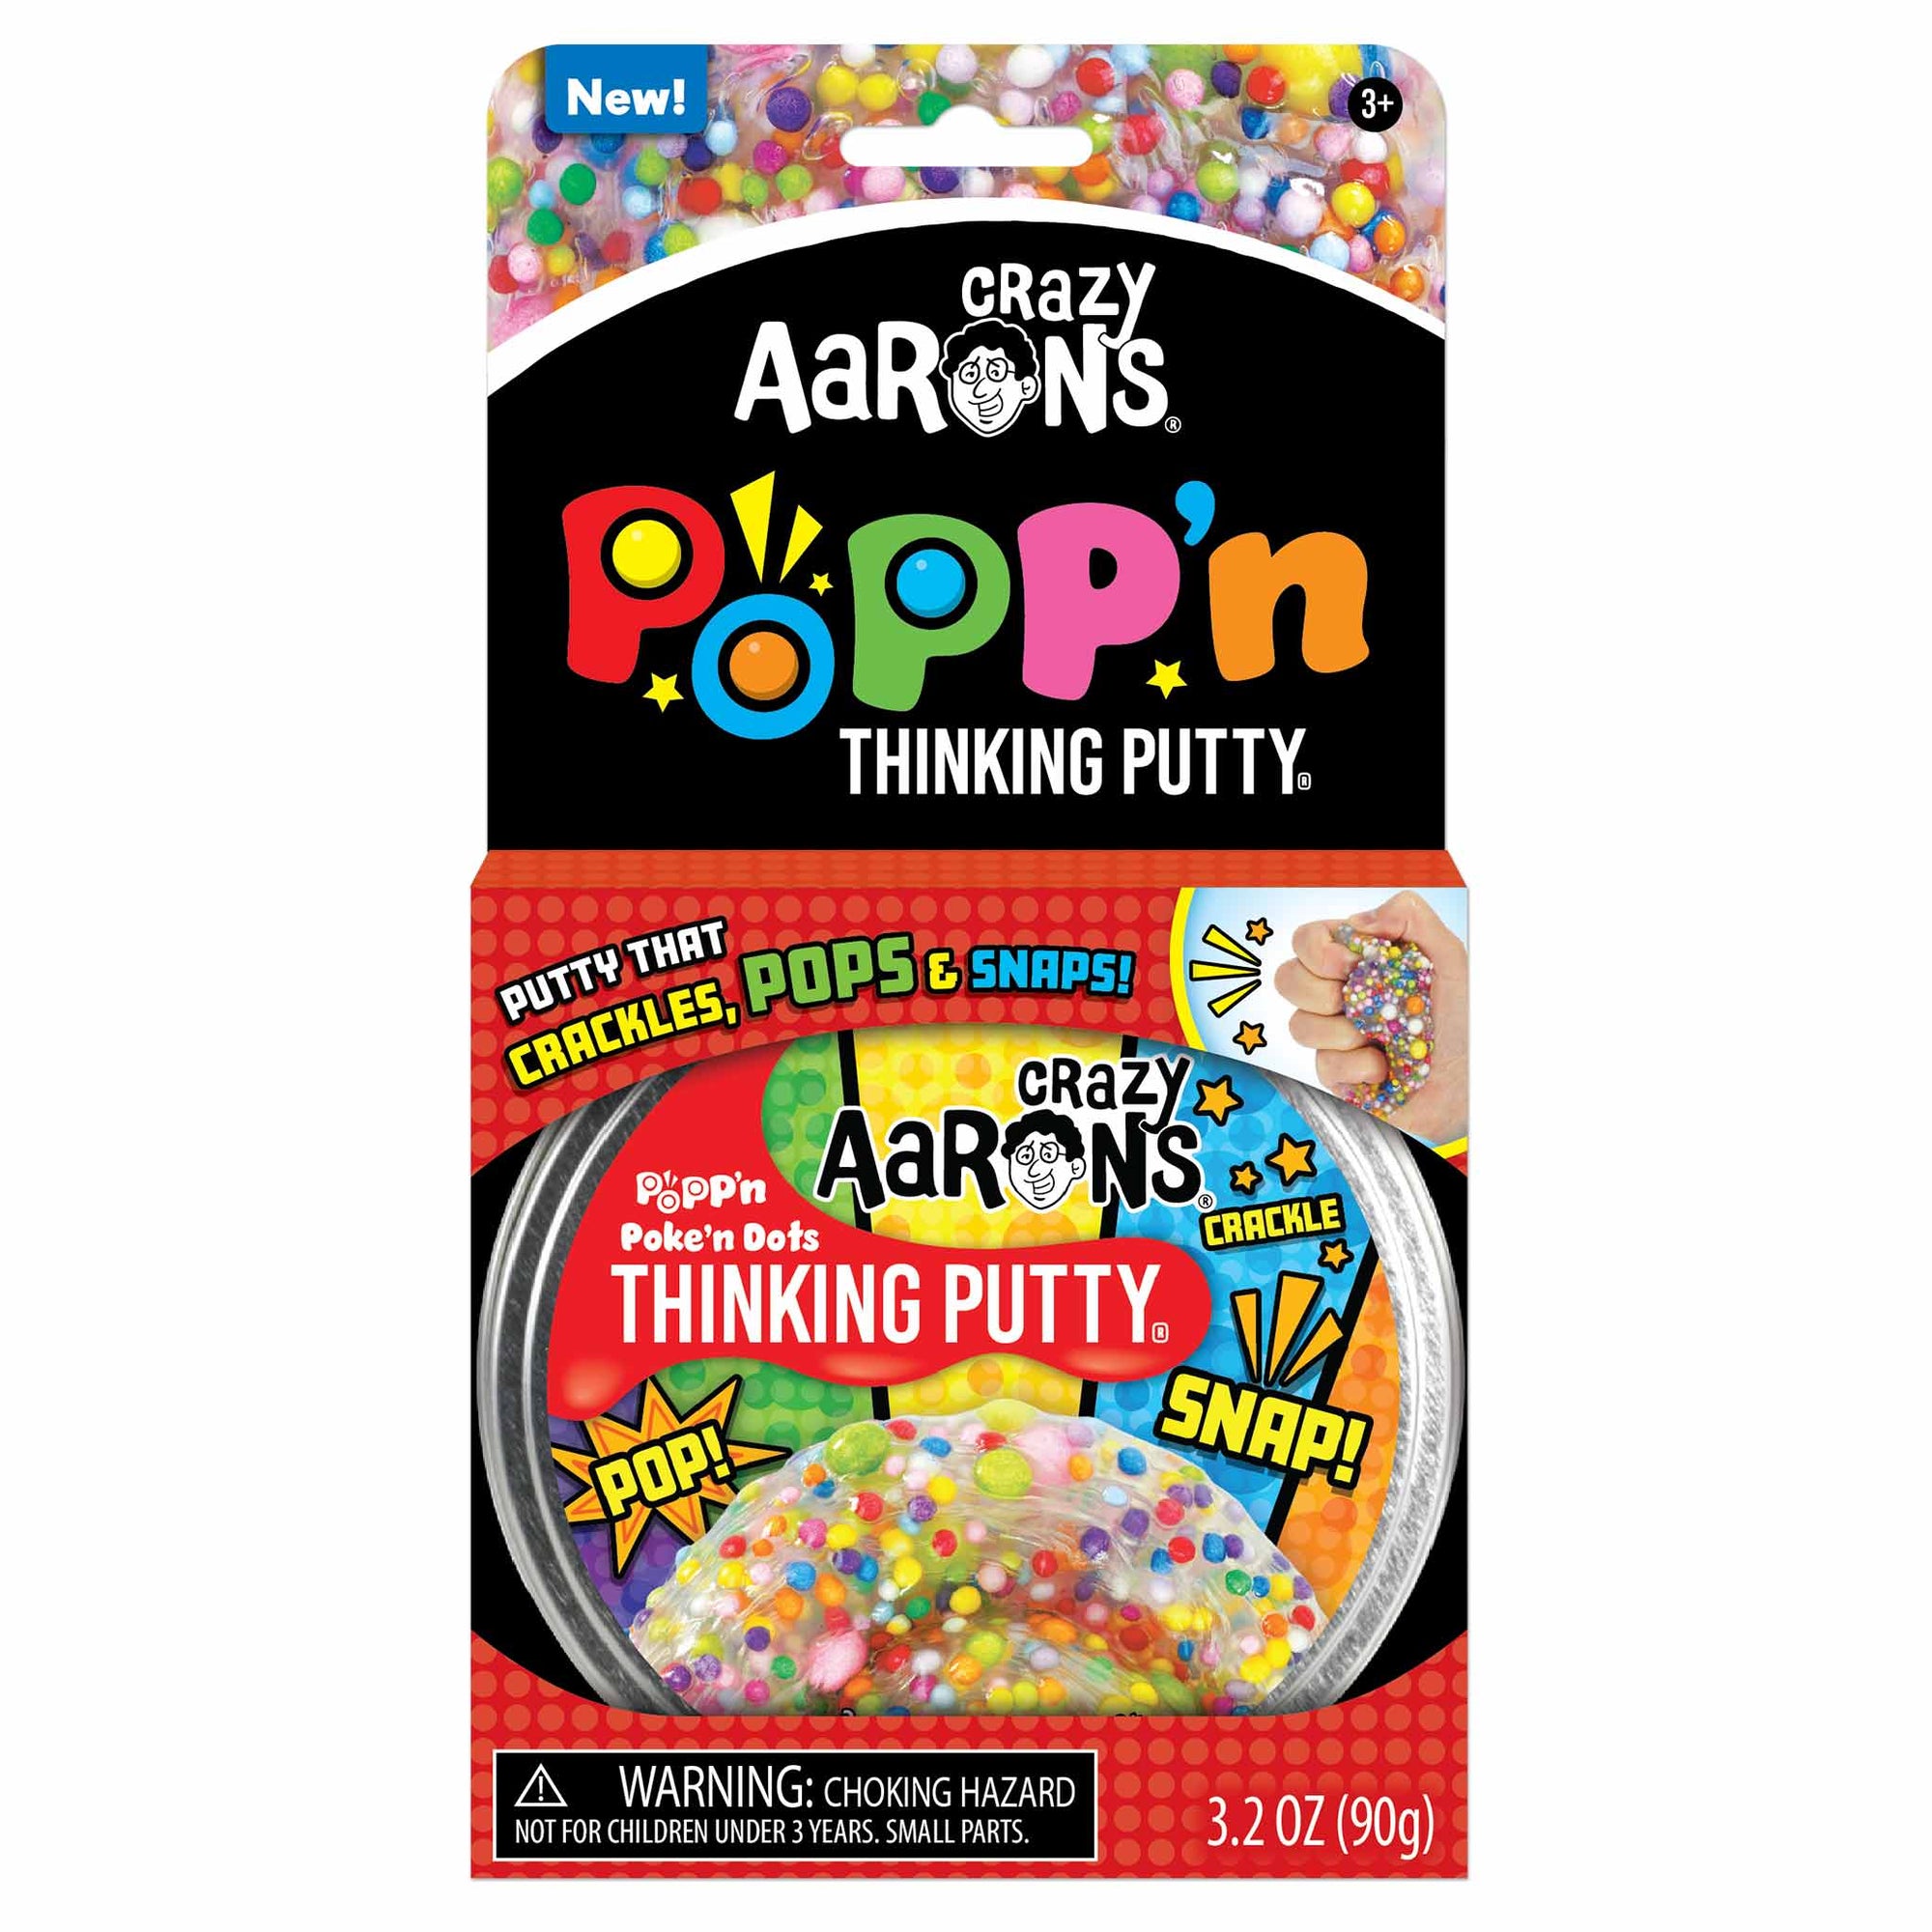 Crazy Aaron's Pike'n Dots Thinking Putty